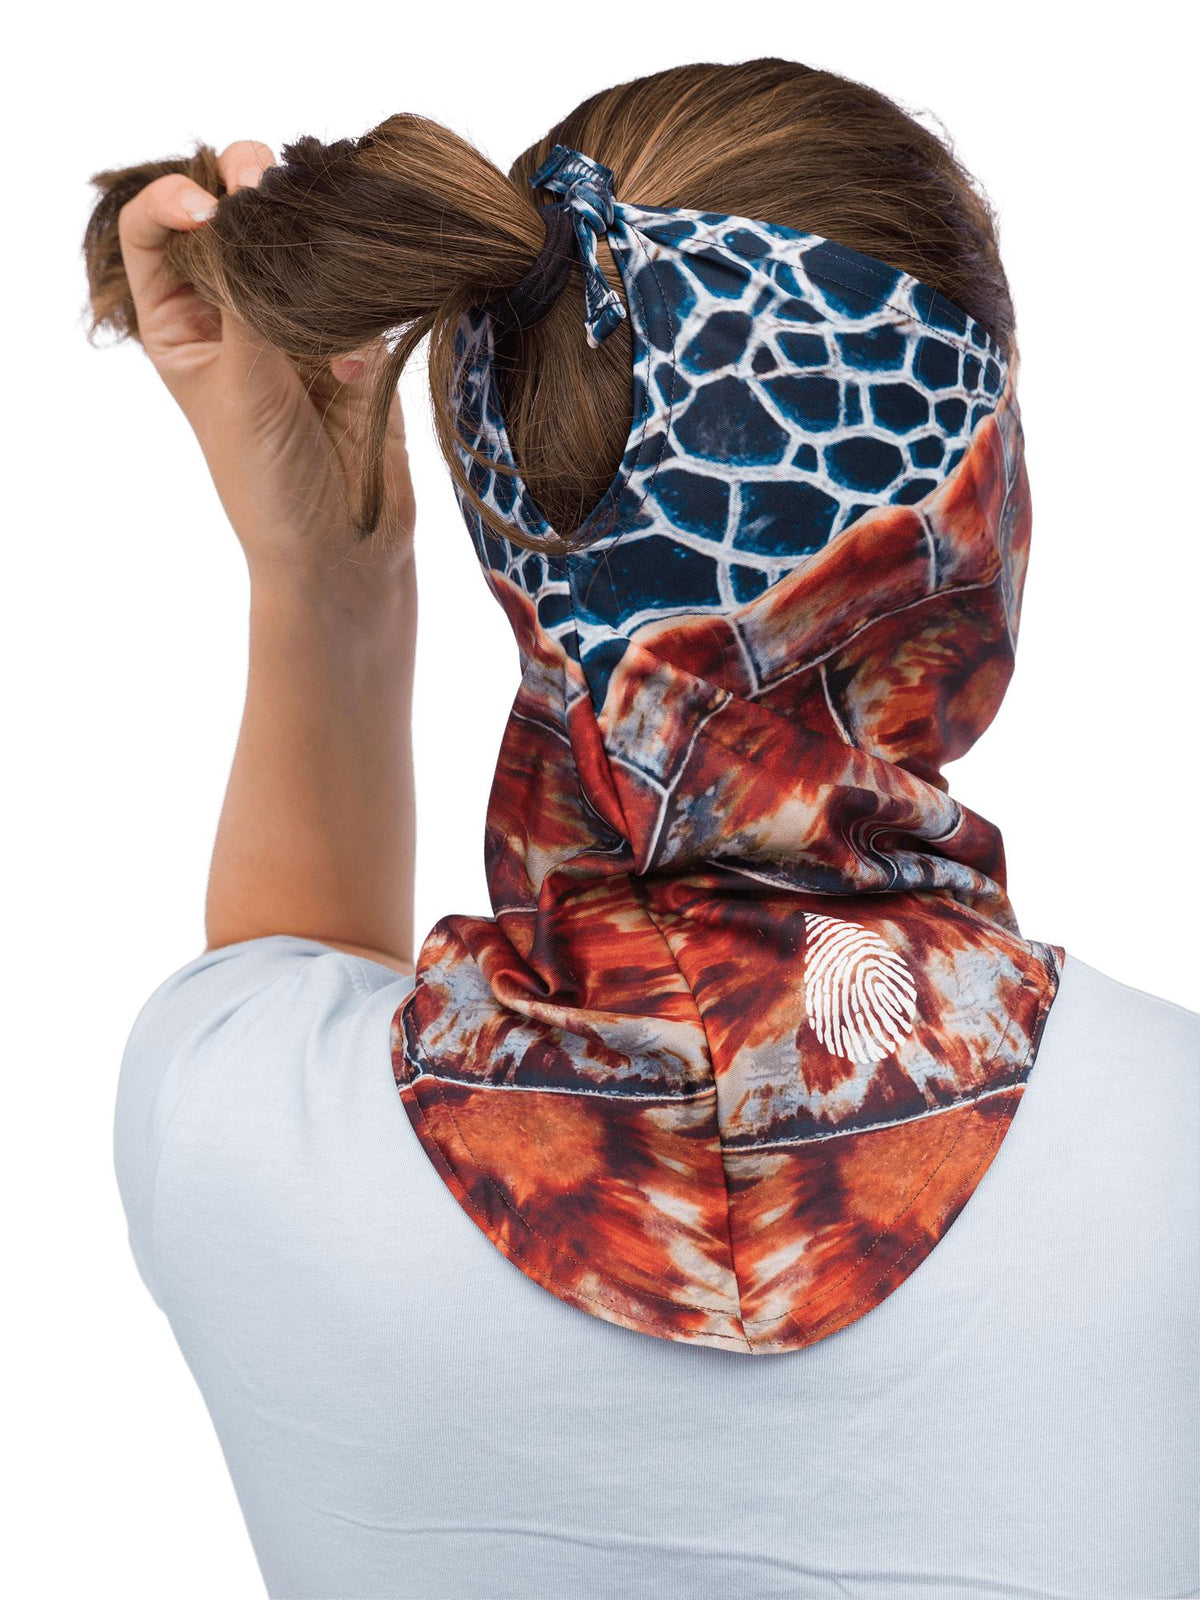 Model: Back tie to adjust size around face, or attach to a hat or ponytail. 